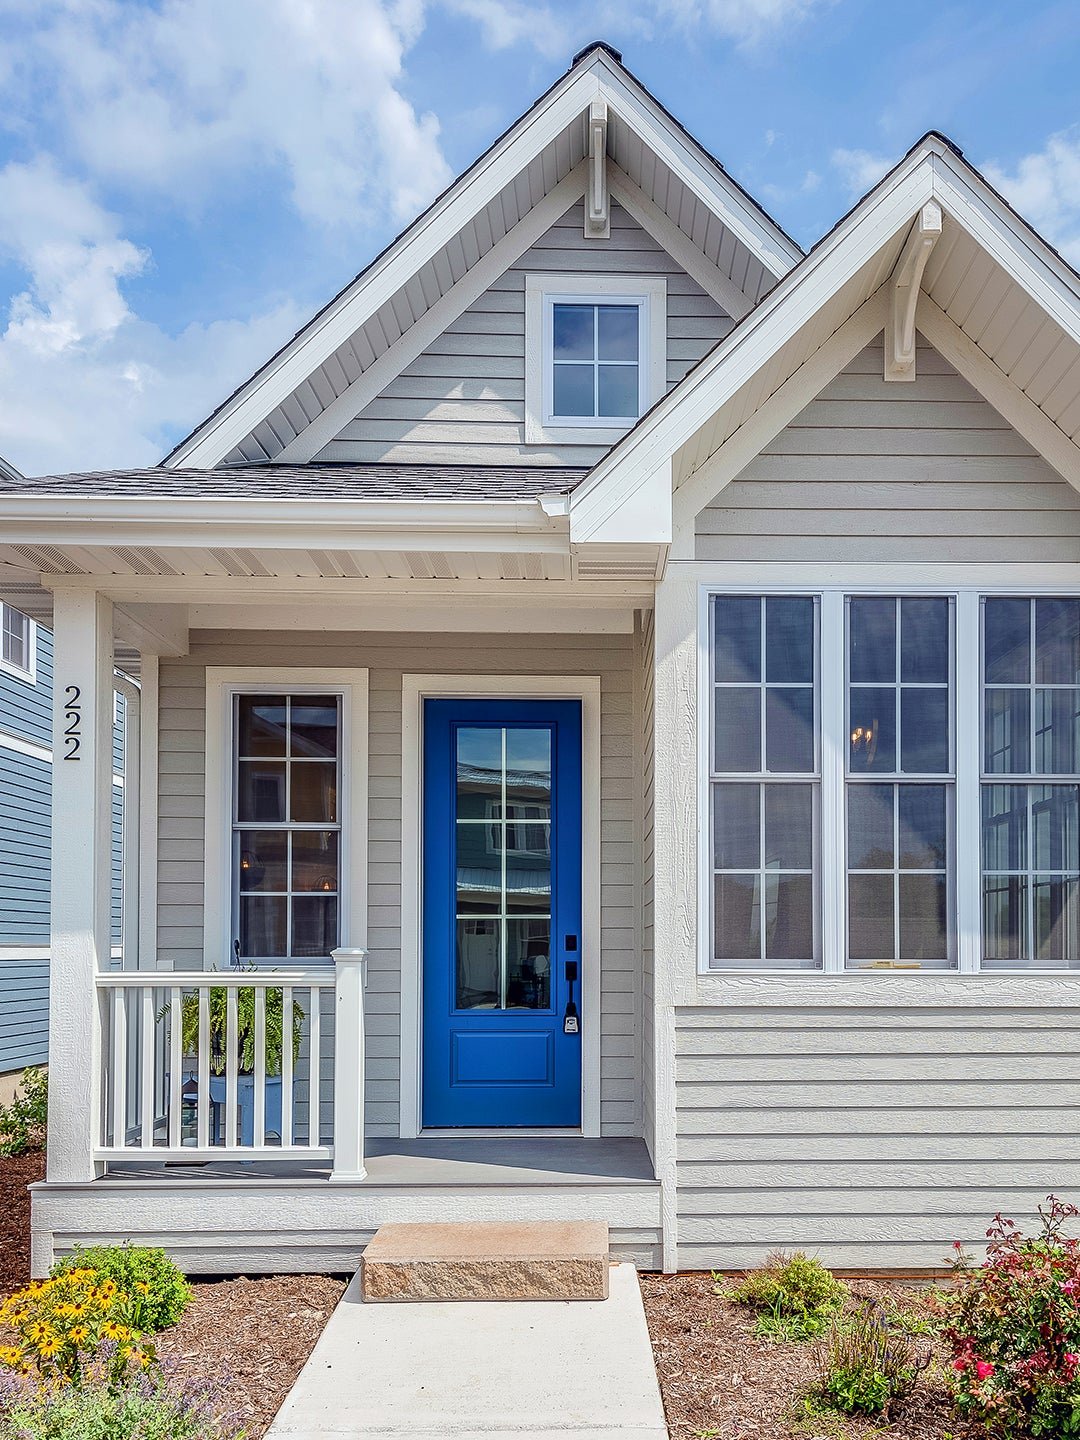 Why Now Isn’t a Good Time to Buy a Starter Home